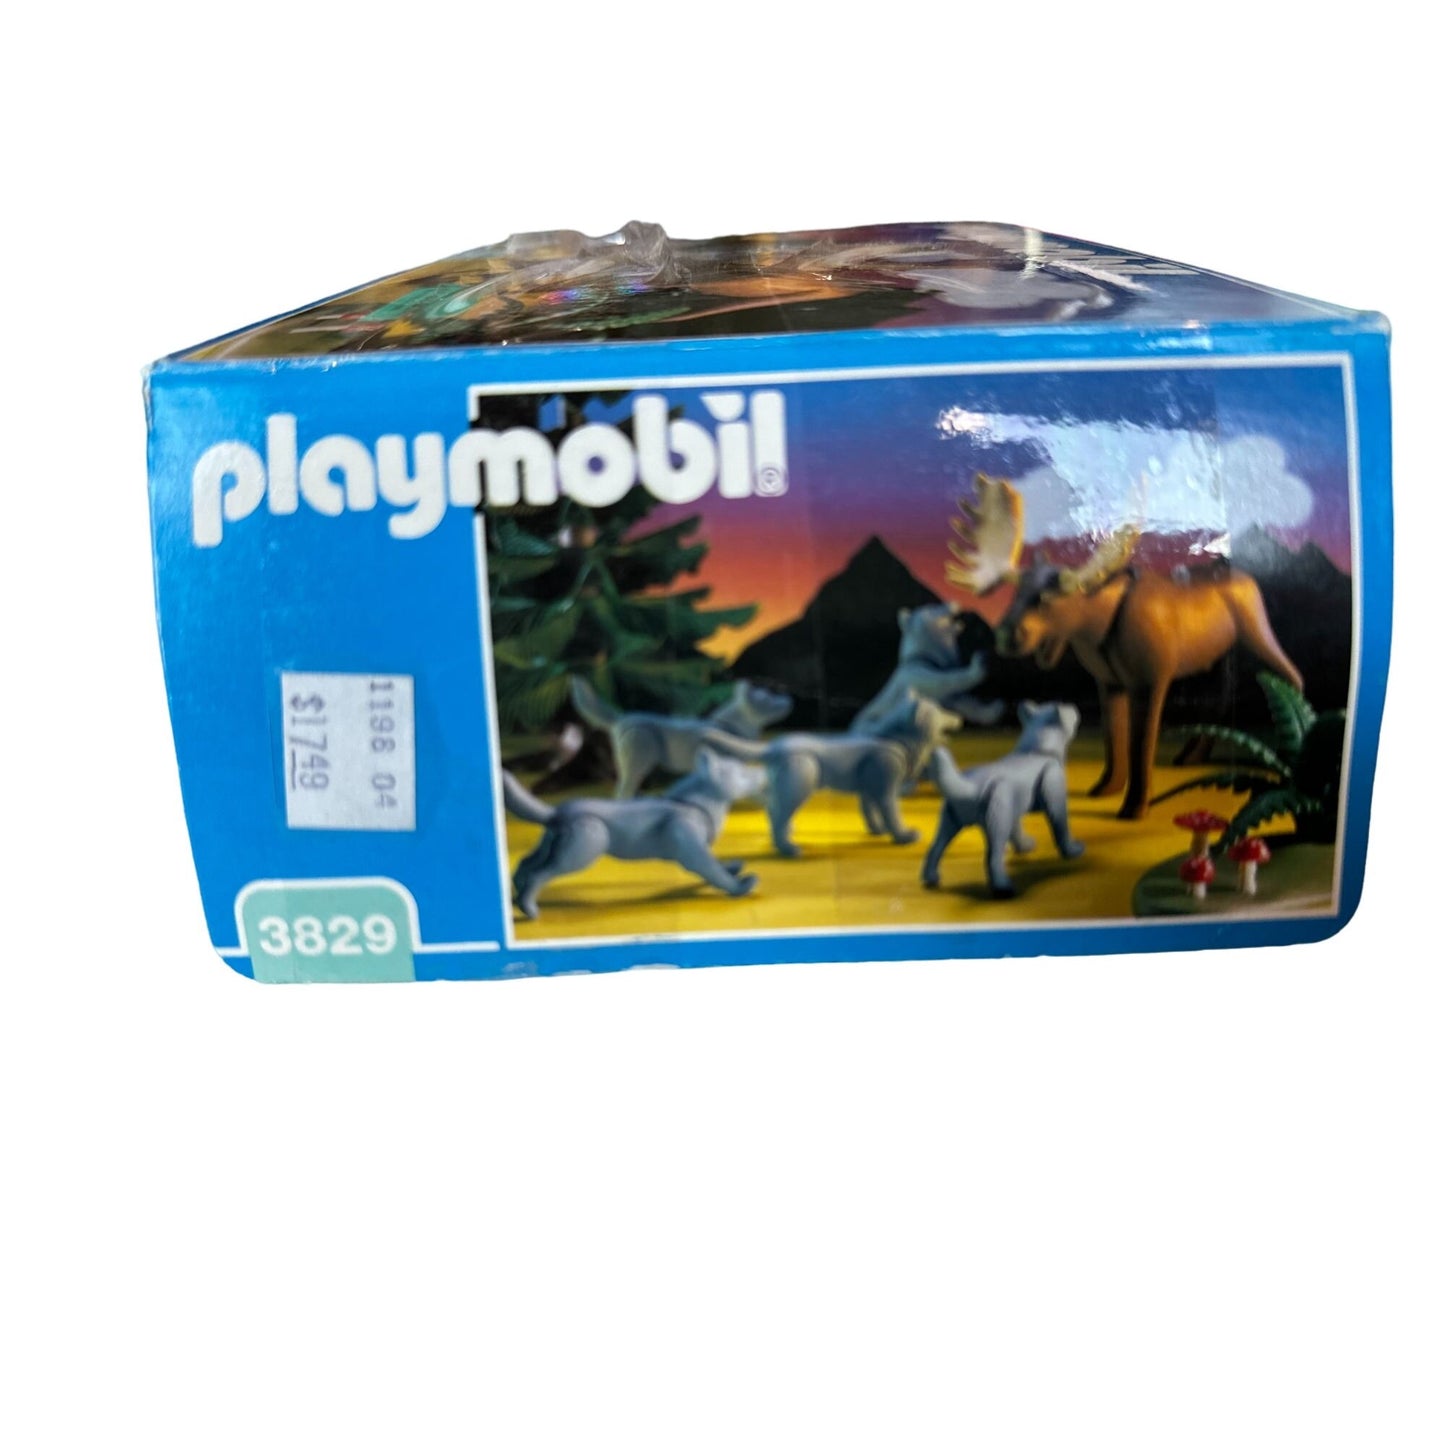 Vintage Playmobil 3829 Woodland Playset Toy Wolves Moose & Fern Collectible